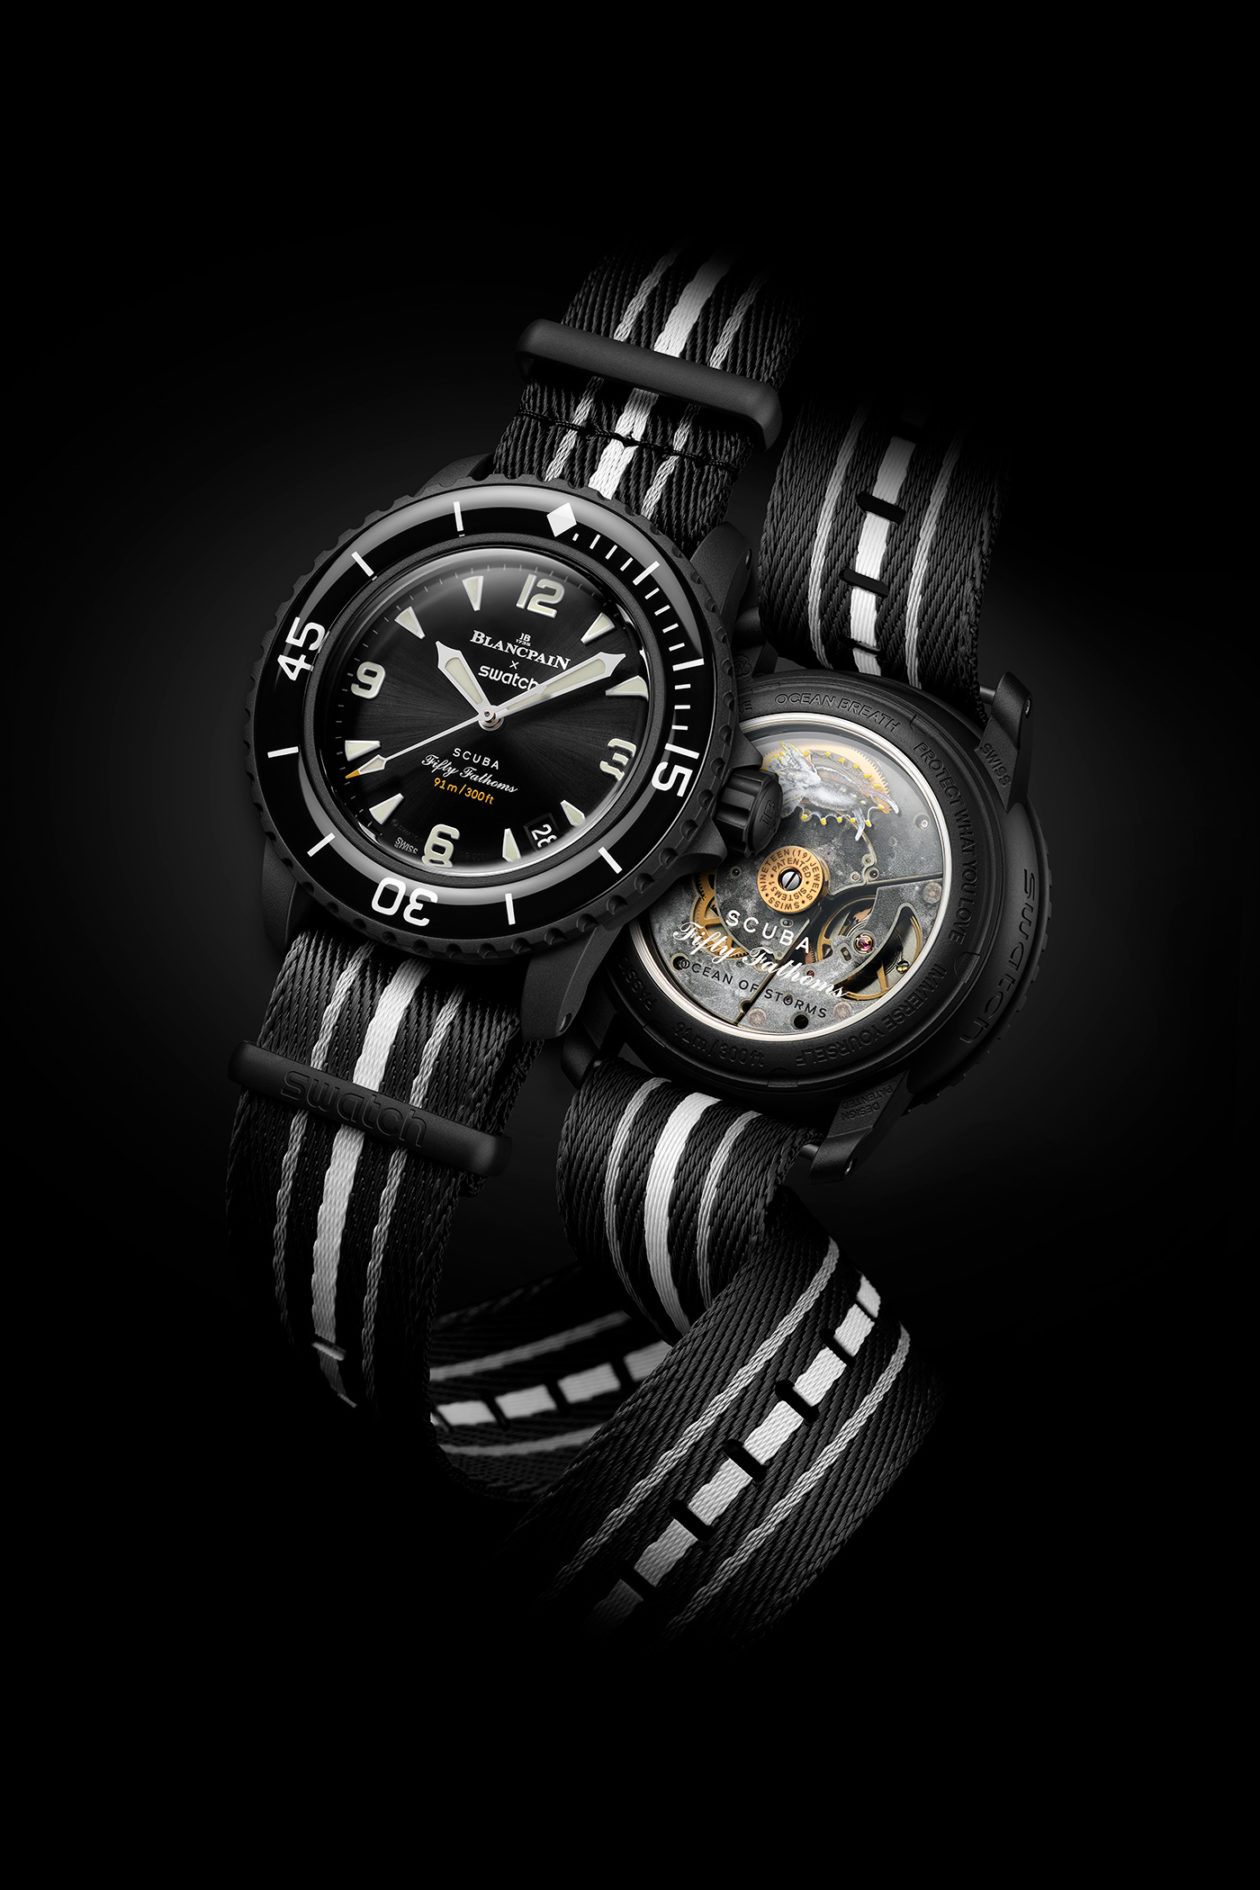 Swatch x Blancpain Scuba Fifty Fathoms “Ocean of Storms”